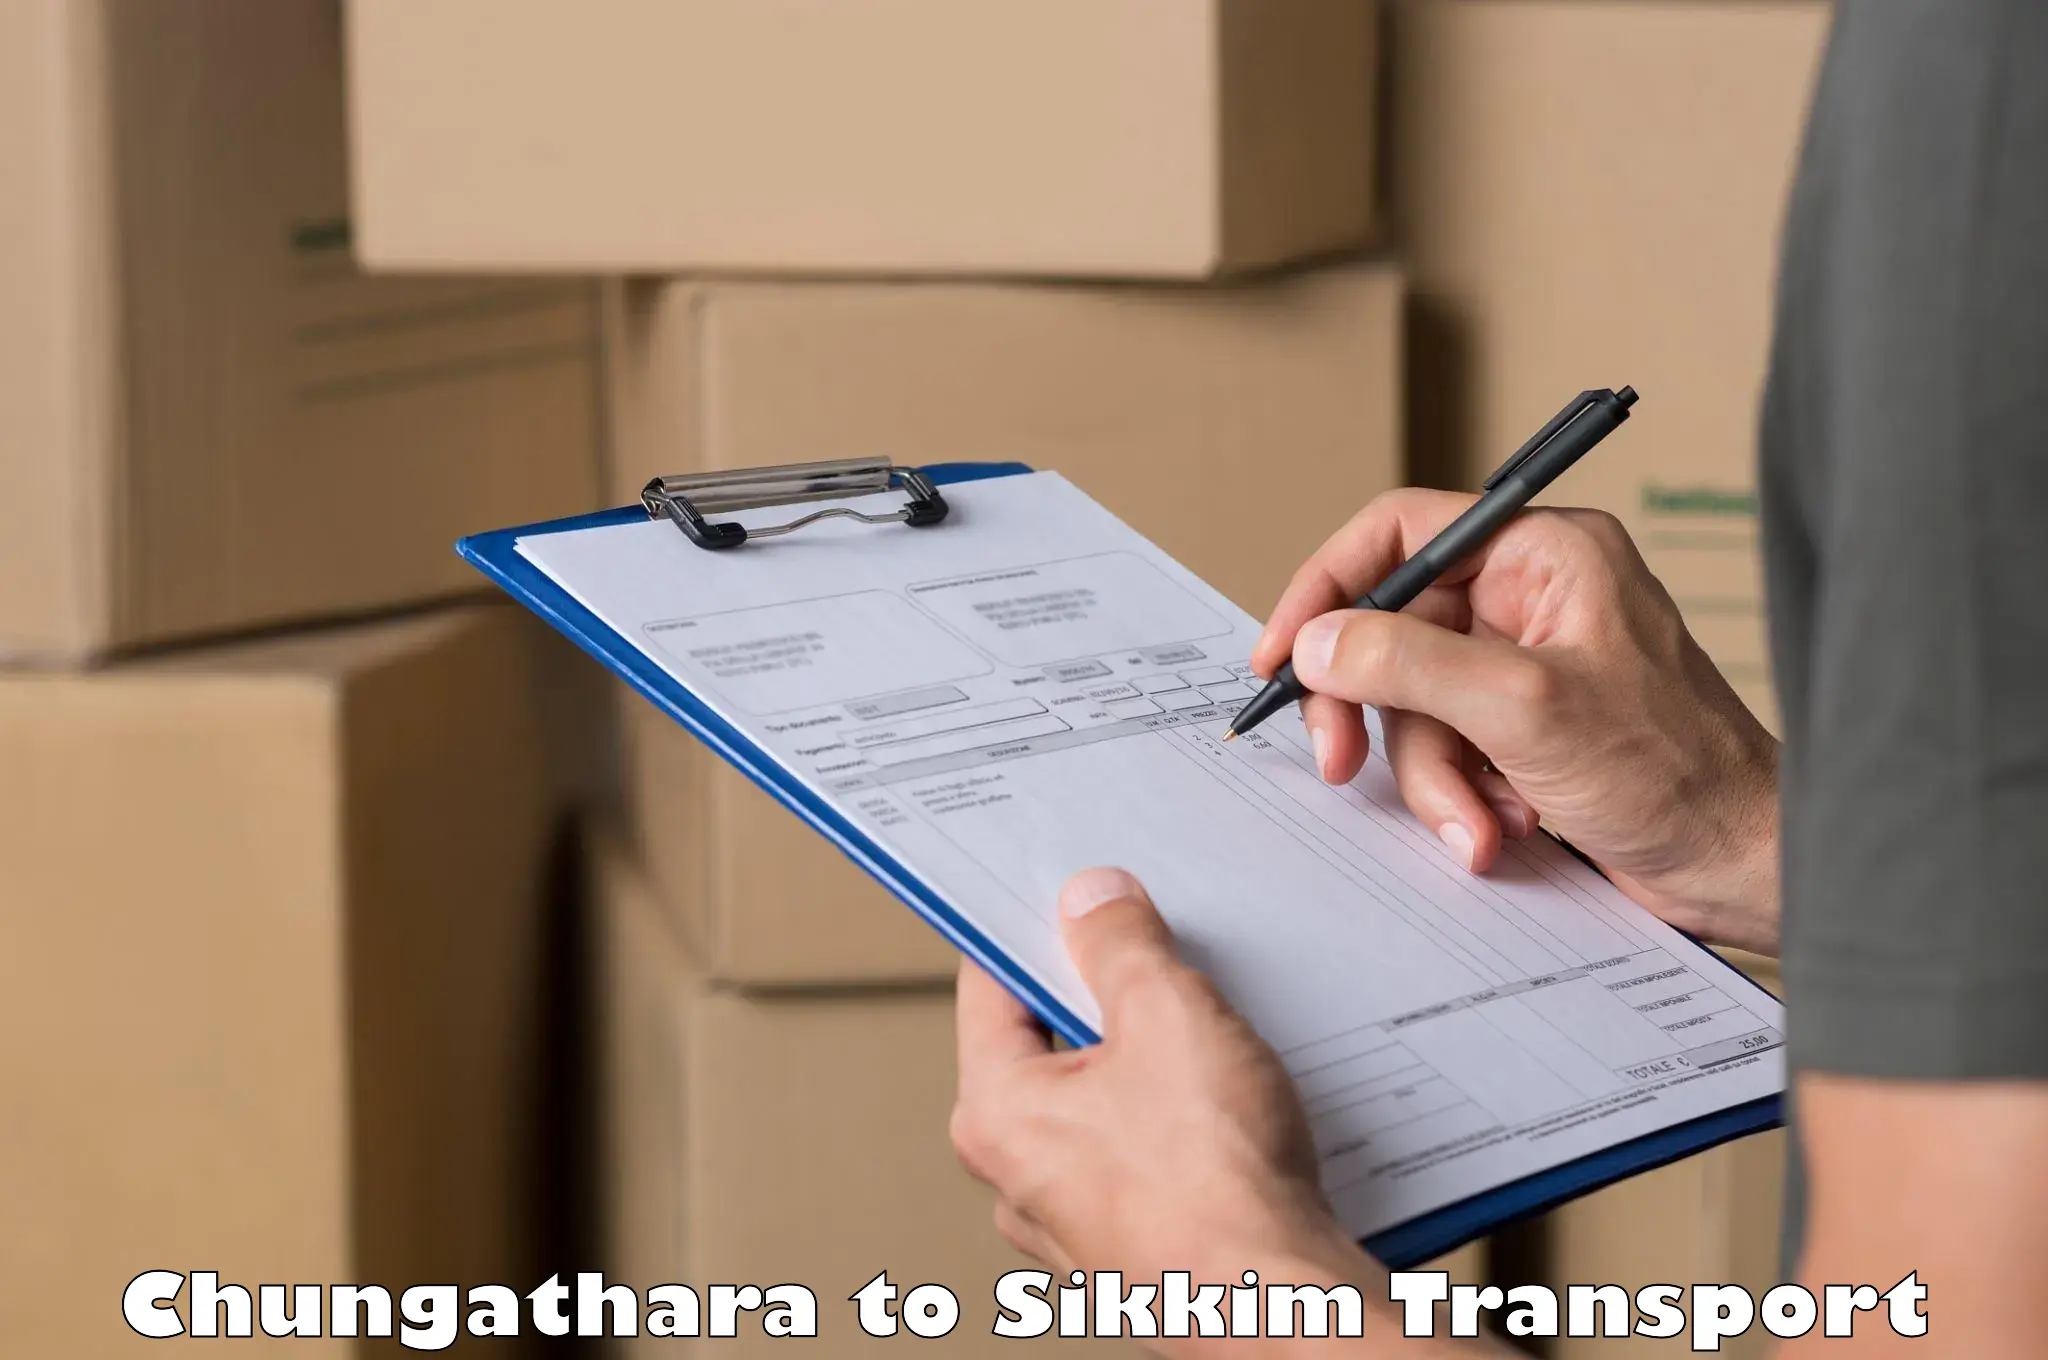 Road transport services Chungathara to South Sikkim